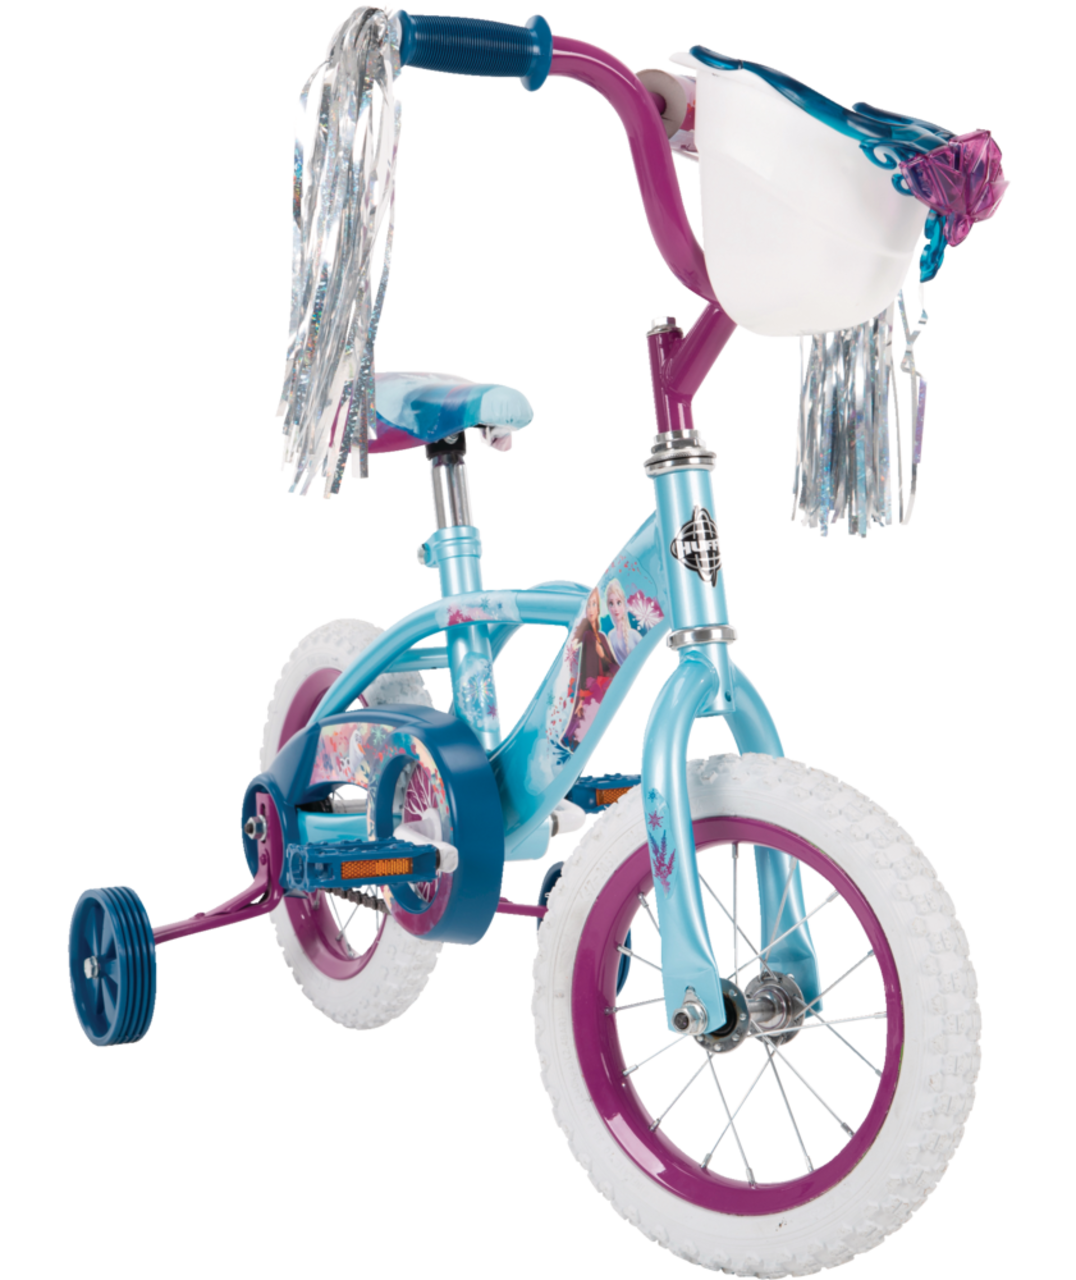 https://media-www.canadiantire.ca/product/playing/cycling/bicycles/0711920/disney-frozen-kids-bike-12--c1337d33-d0f1-4a32-9e93-aabff7c3395f.png?imdensity=1&imwidth=640&impolicy=mZoom